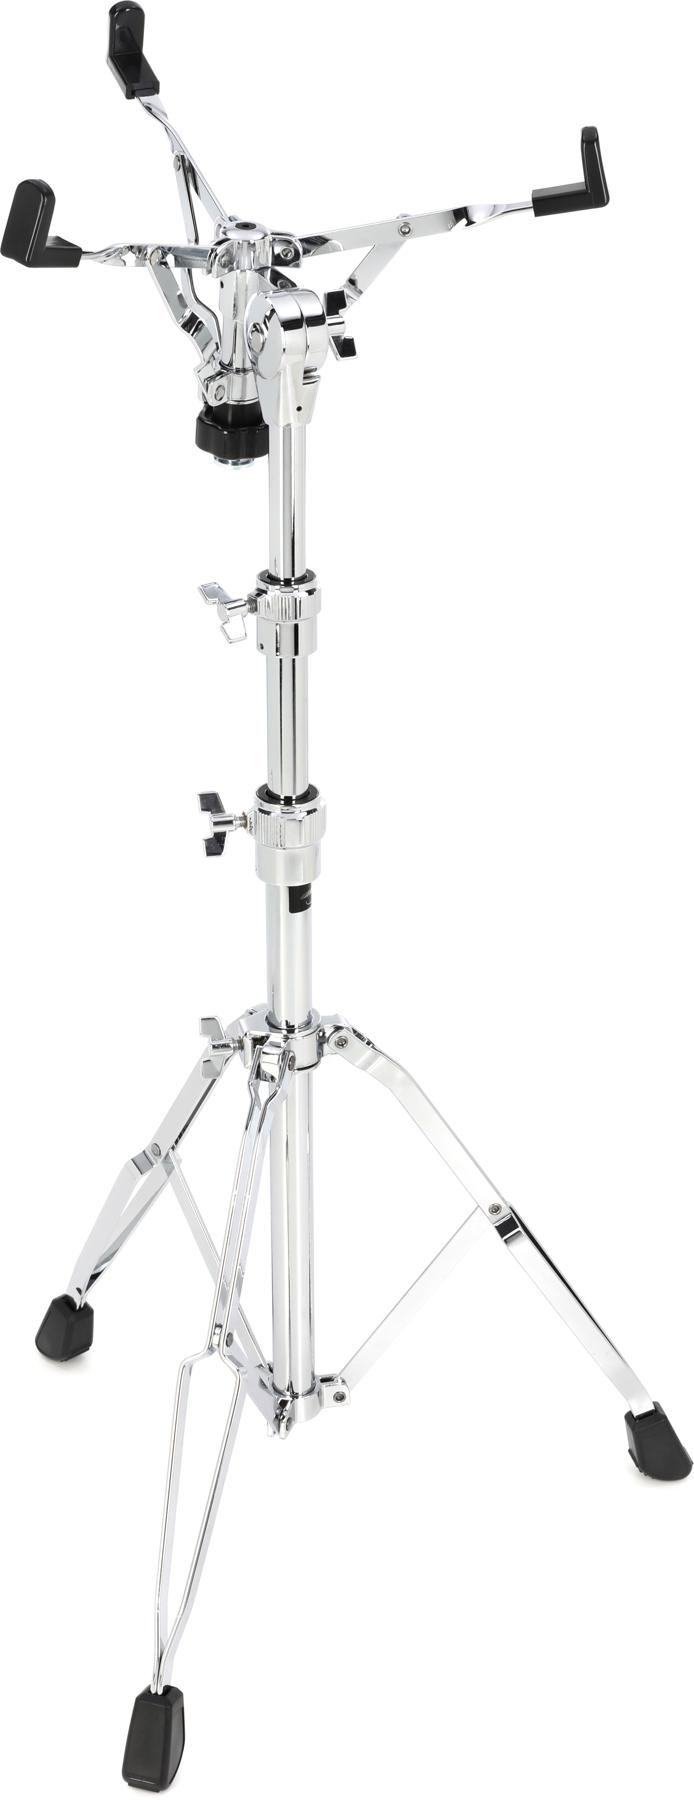 Ahead ASSTT Snare/Tenor Practice Pad Stand - Heavy Duty, Tall